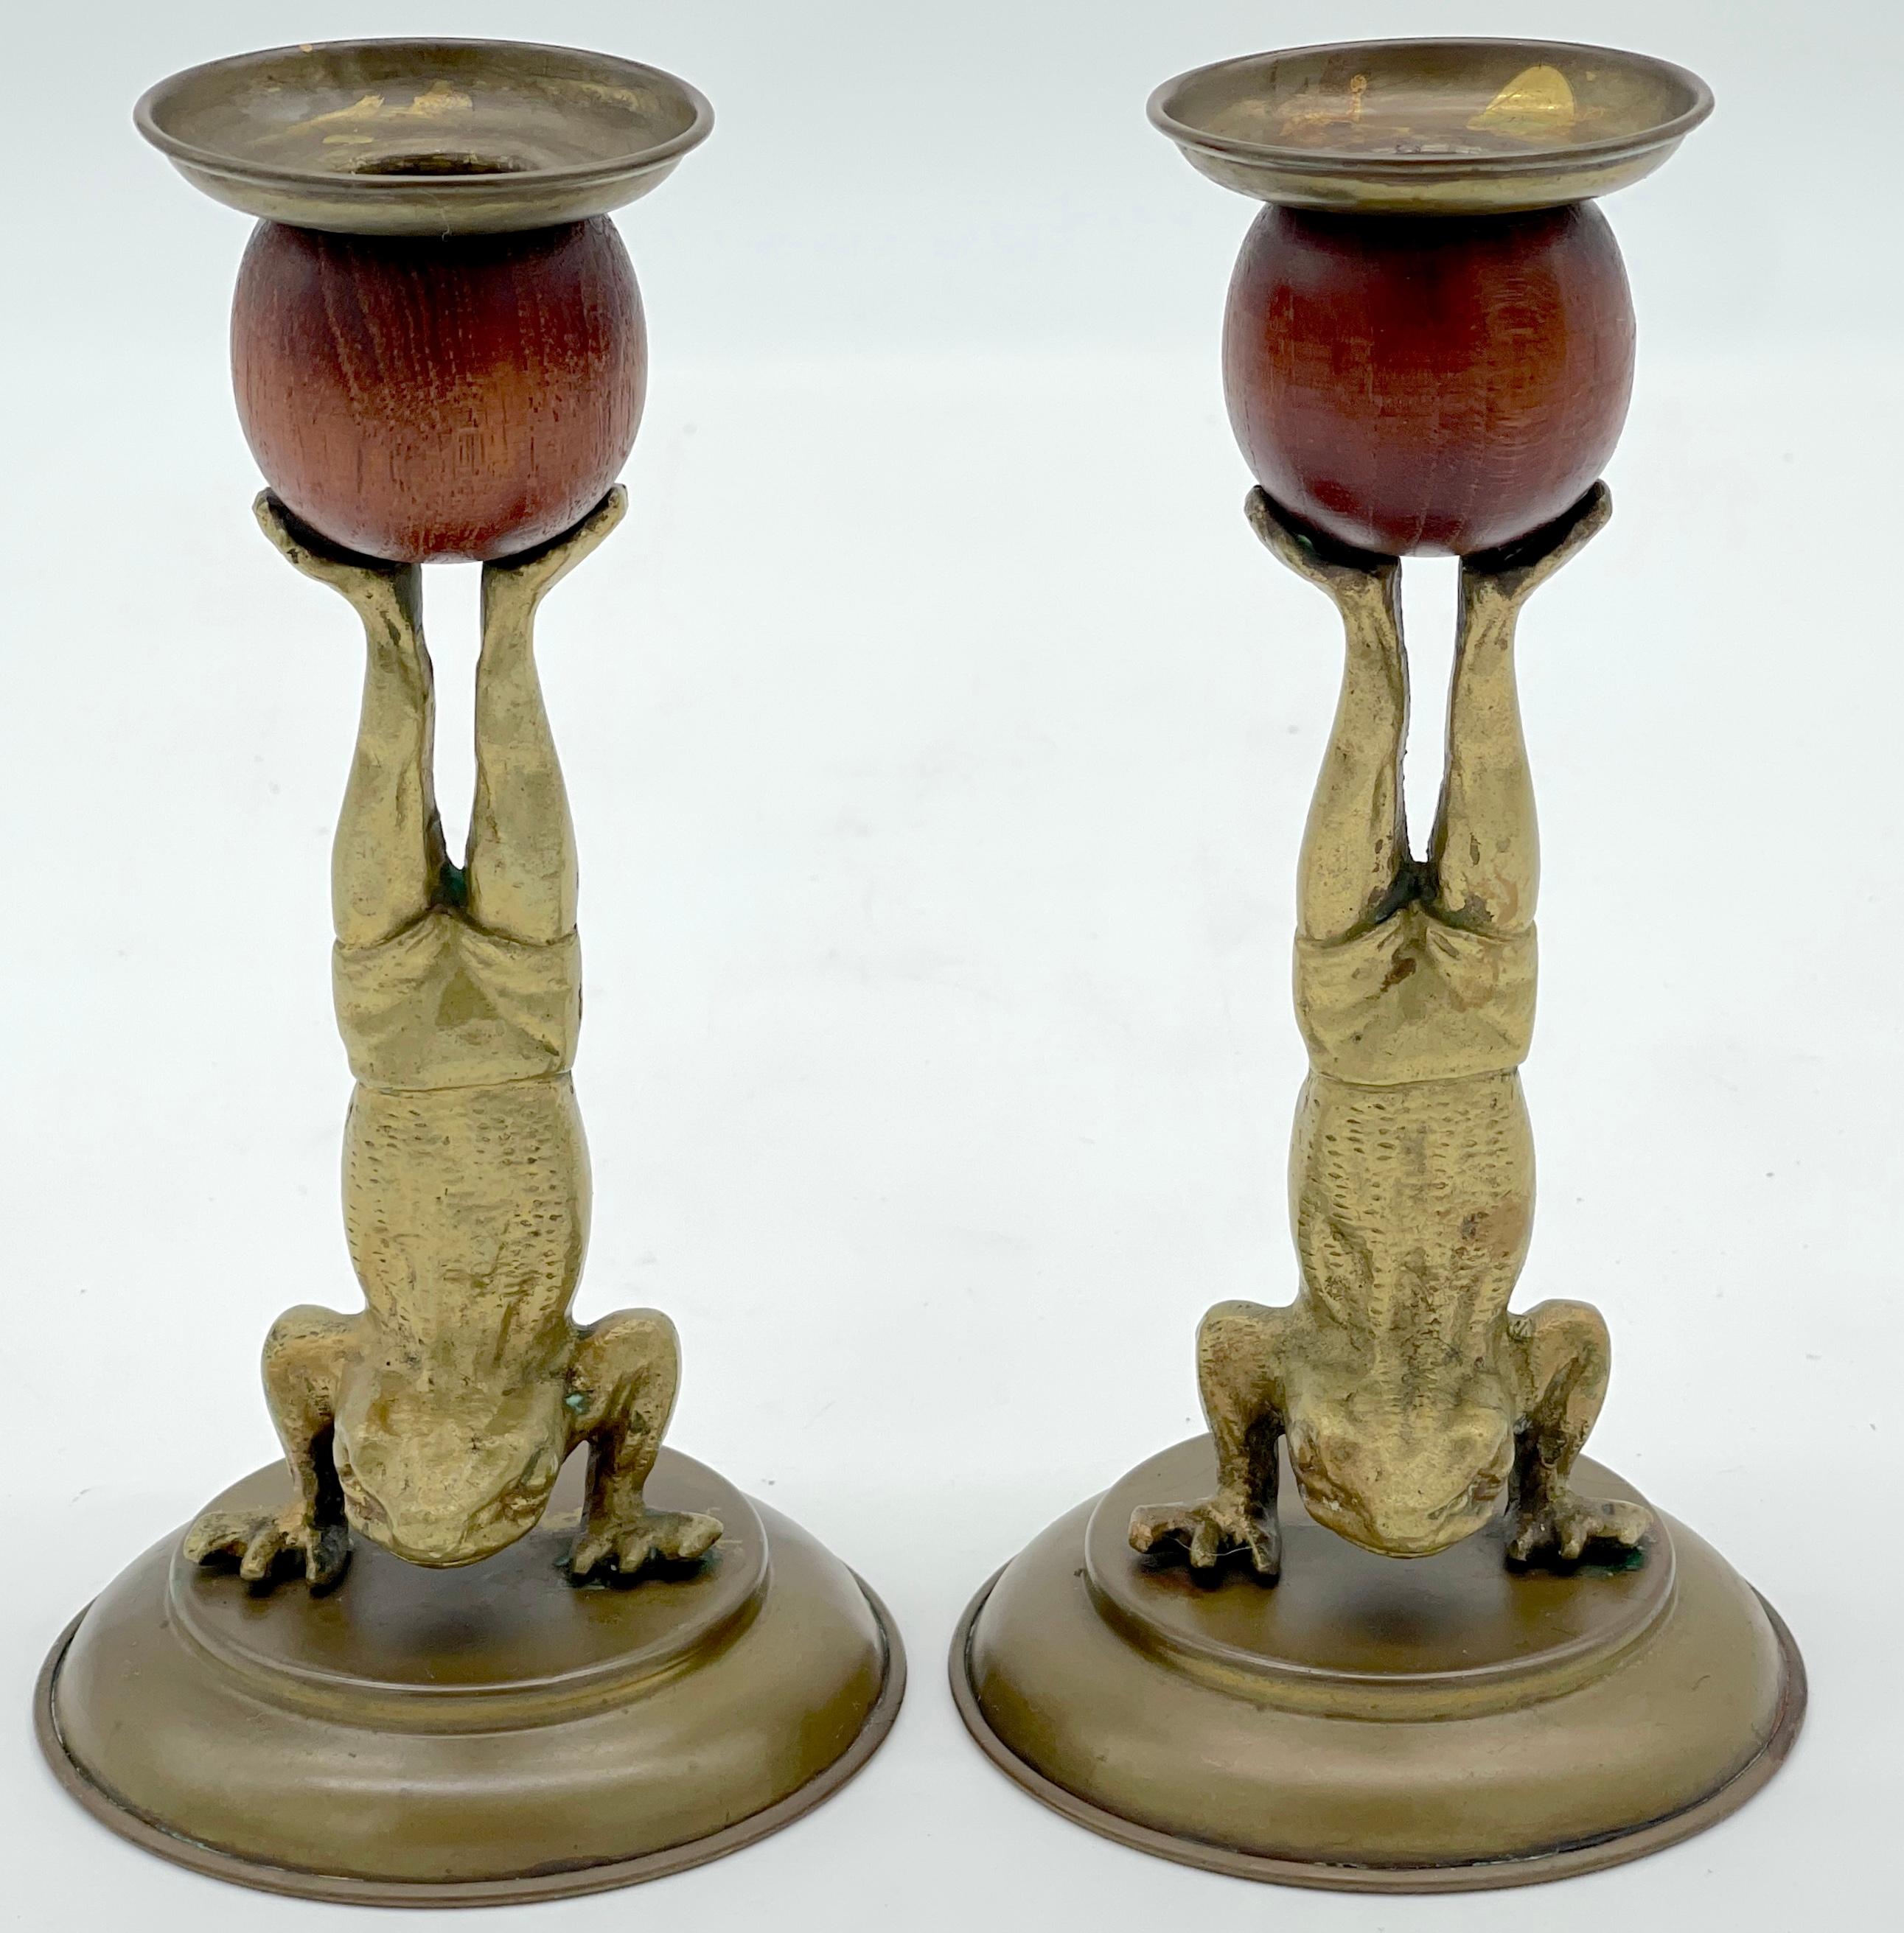 A Pair of Acrobatic Frog Brass & Wood Candlesticks by Arthur Court, 1979 

Add a whimsical touch to your interior, consider this charming pair of acrobatic frog brass & wood candlesticks by Arthur Court.  Each Victorian-style candlestick stands at 7